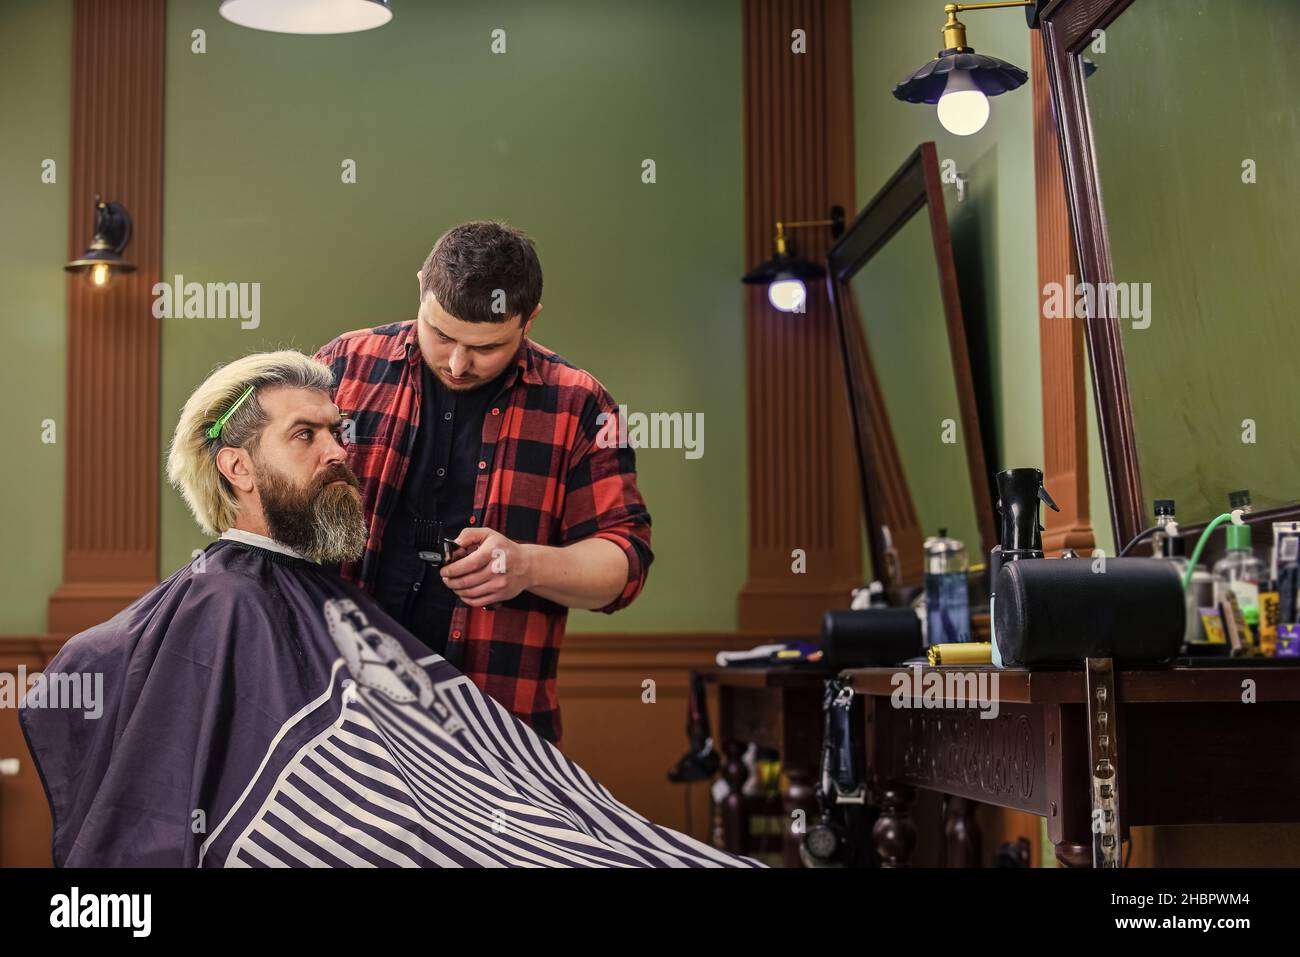 Make it possible with us. dye hair and give new shape. male hairdresser  salon. barber professional master. making new hairstyle. man get haircut  Stock Photo - Alamy